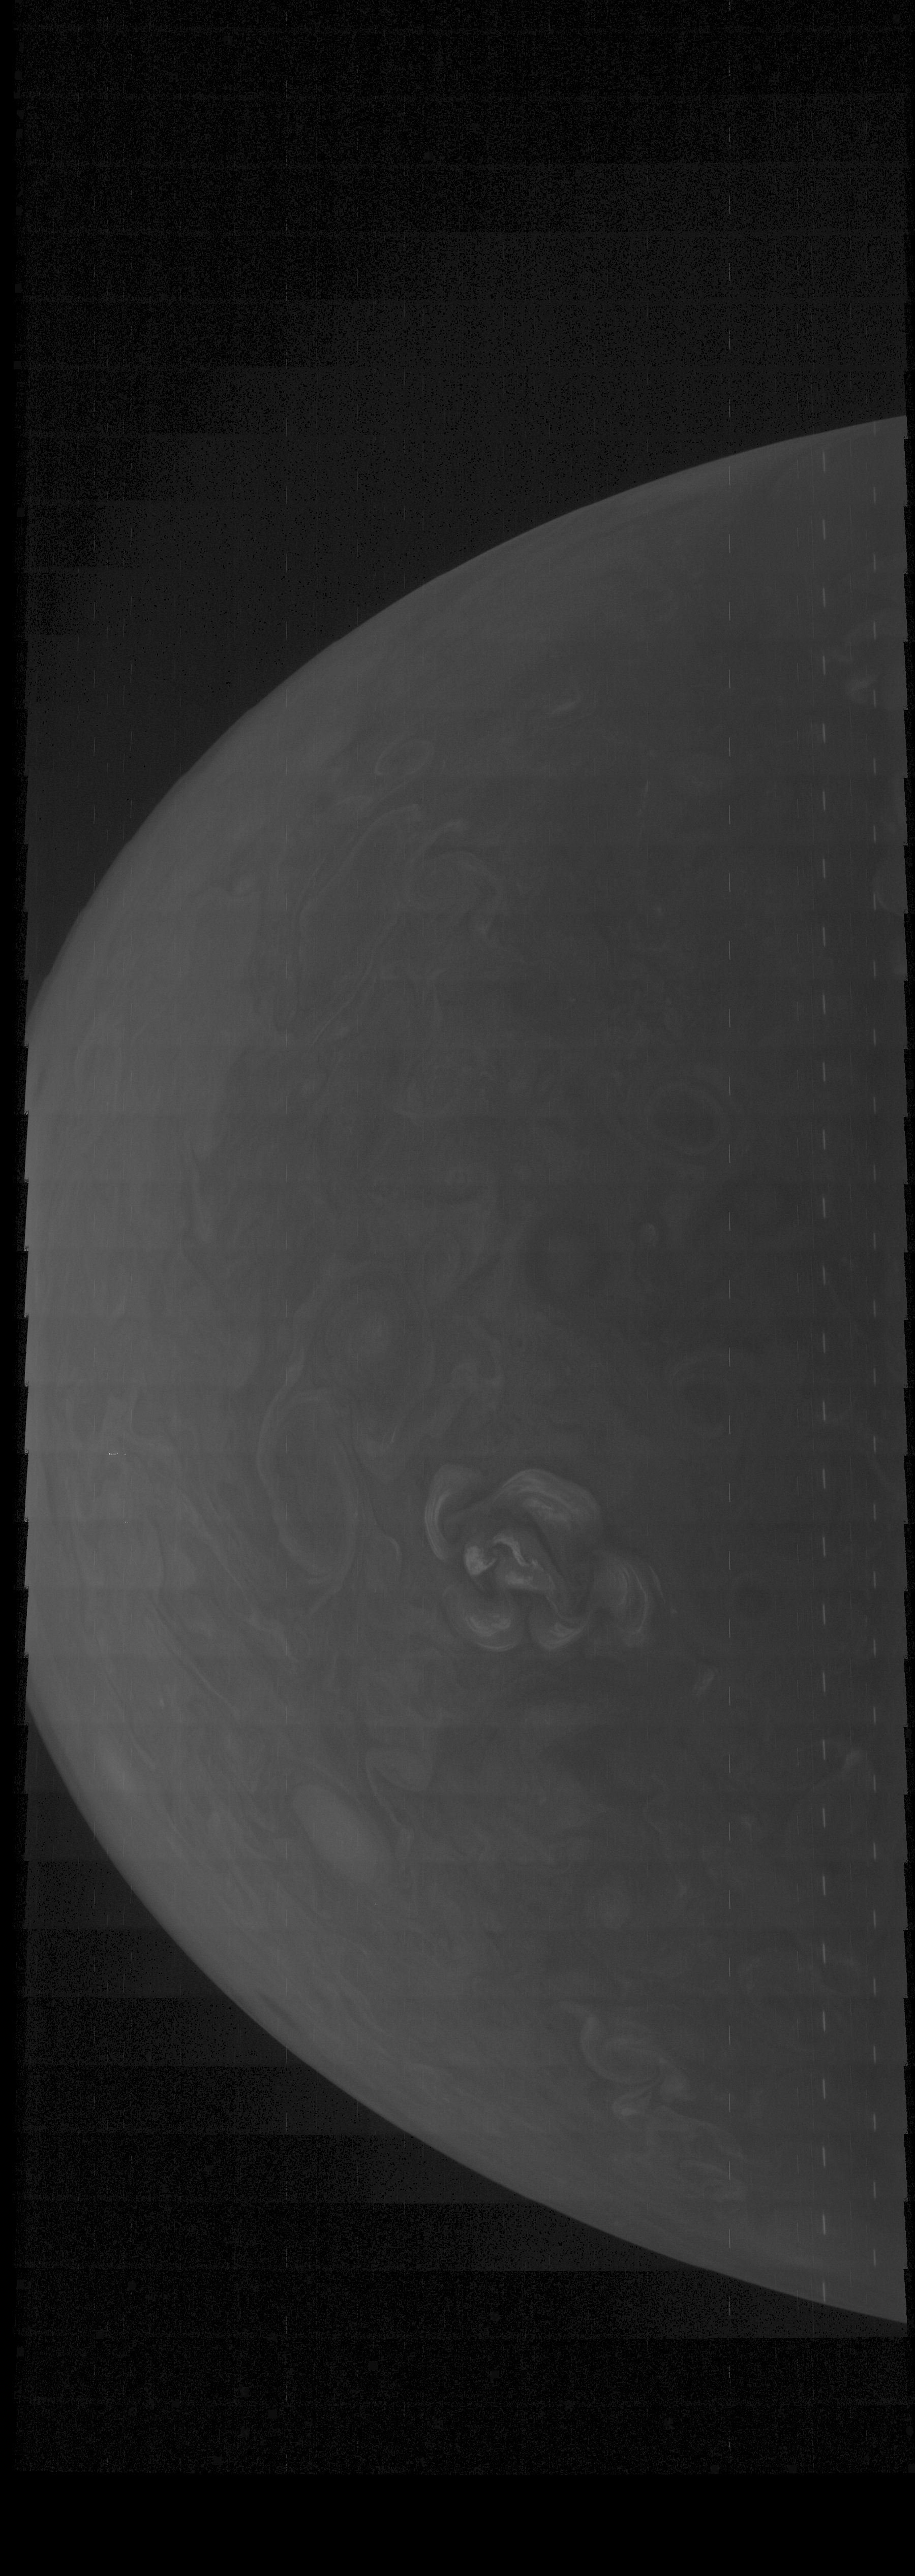 JNCE_2020313_30M00016_V01-raw_proc_hollow_sphere_m_pj_out.BMP_thumbnail_.png